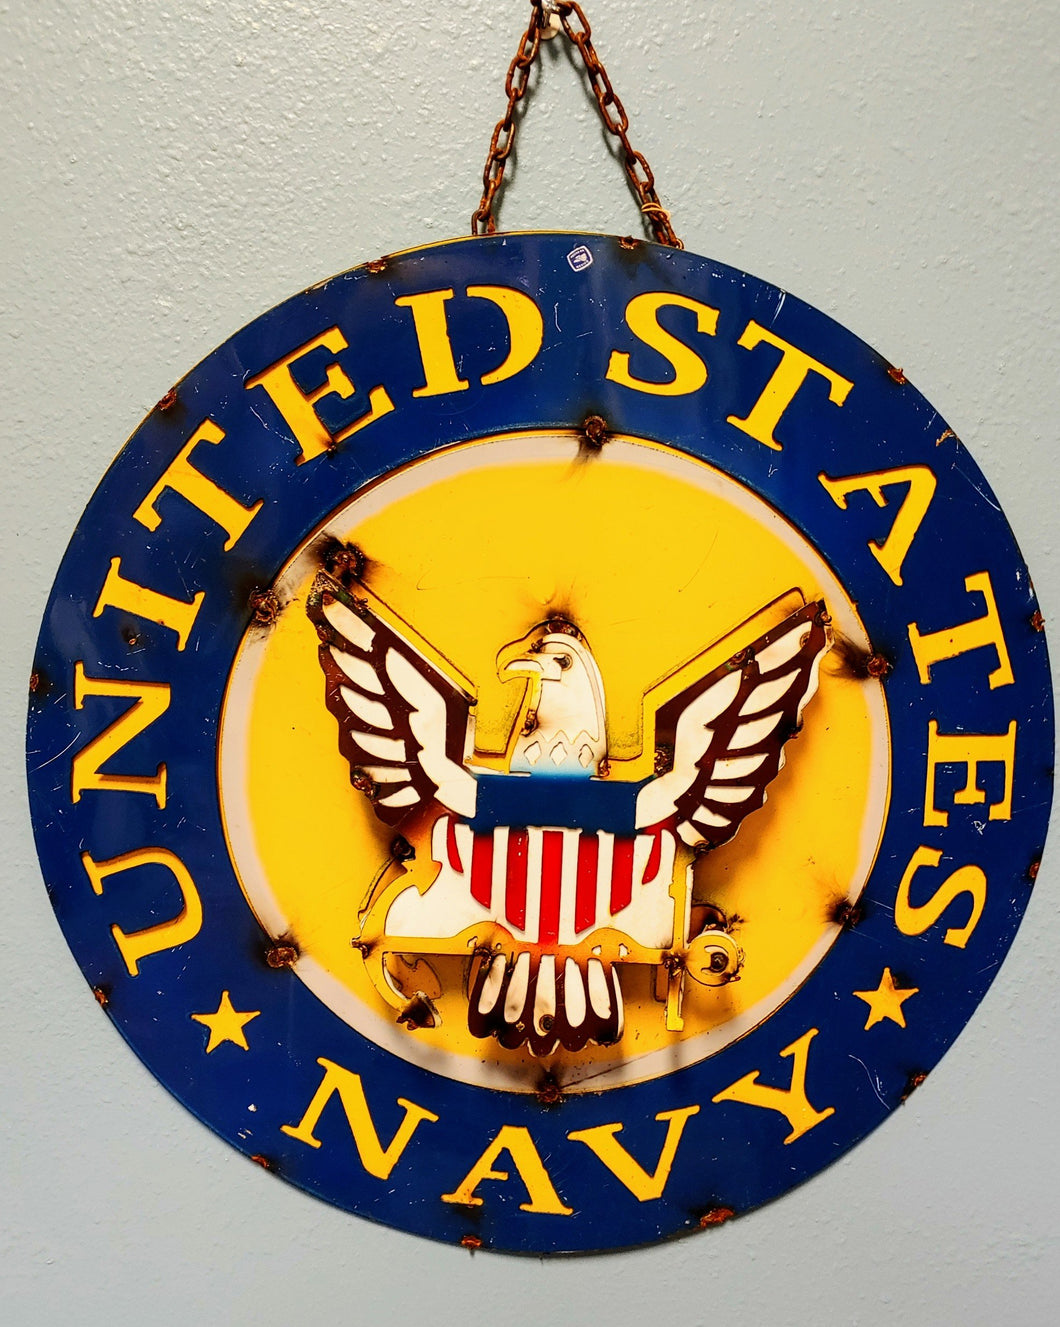 United States Navy round metal sign, yellow lettering with navy blue background. Bald eagle featured in the center that is 3D. 2 inches raised from the sign.